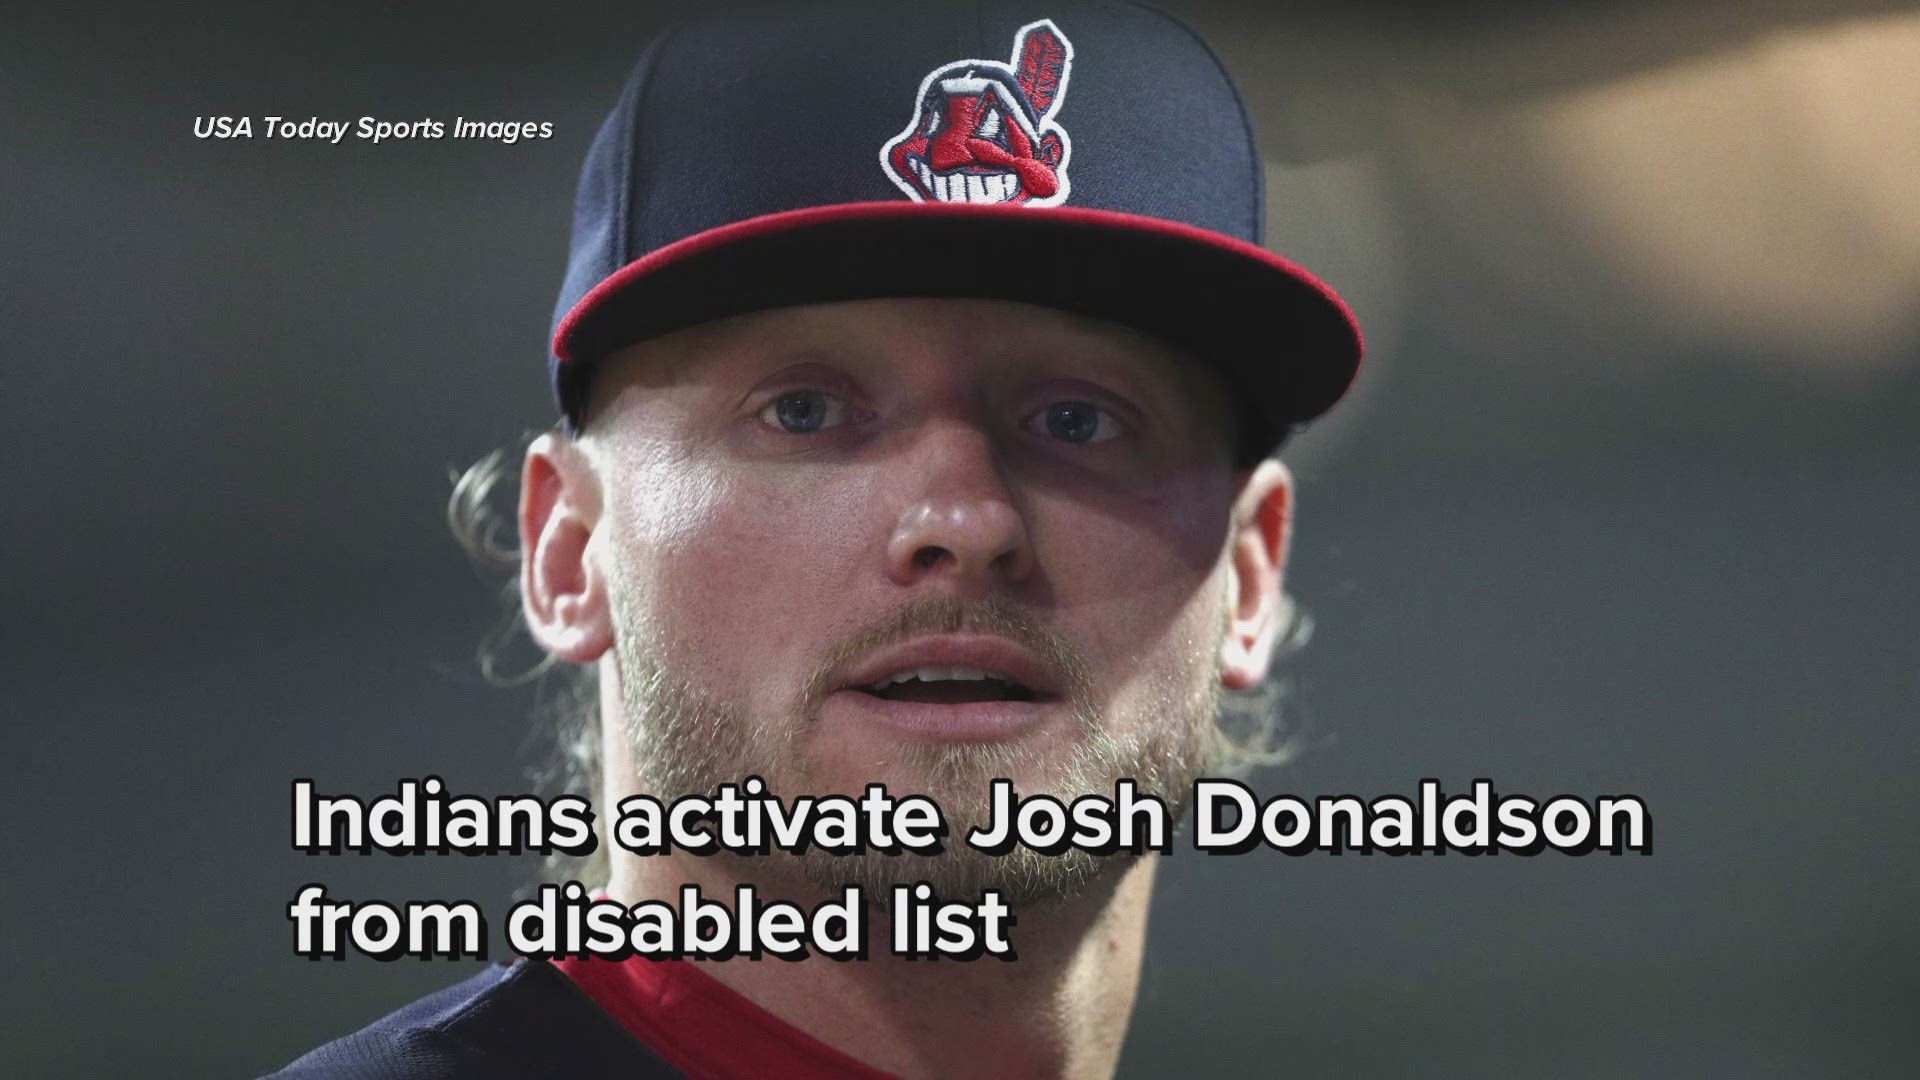 Cleveland Indians activate Josh Donaldson from disabled list